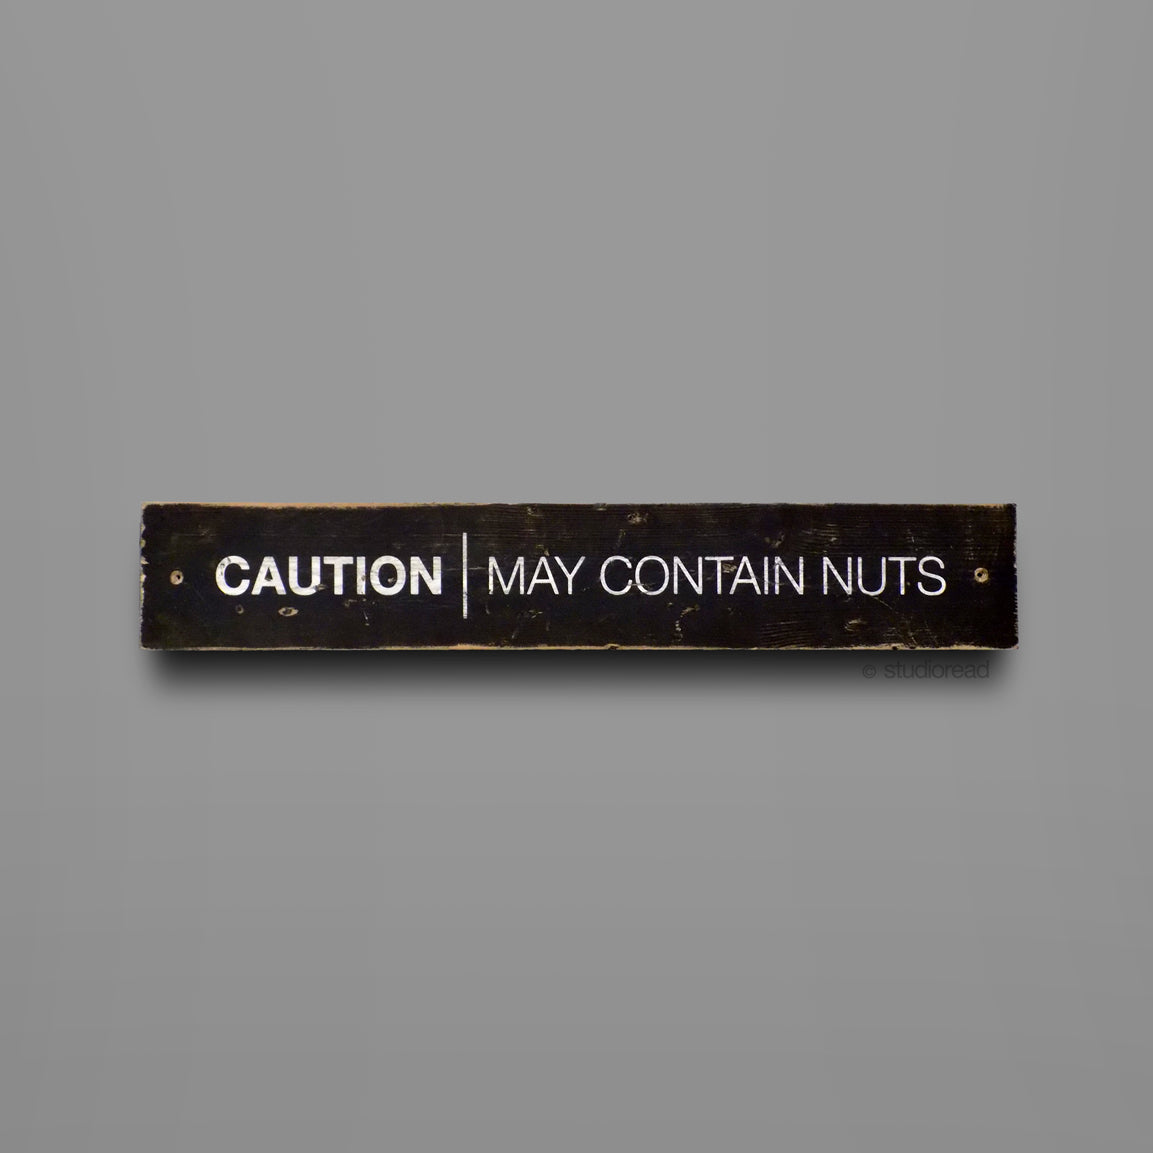 May contain nuts - Sign